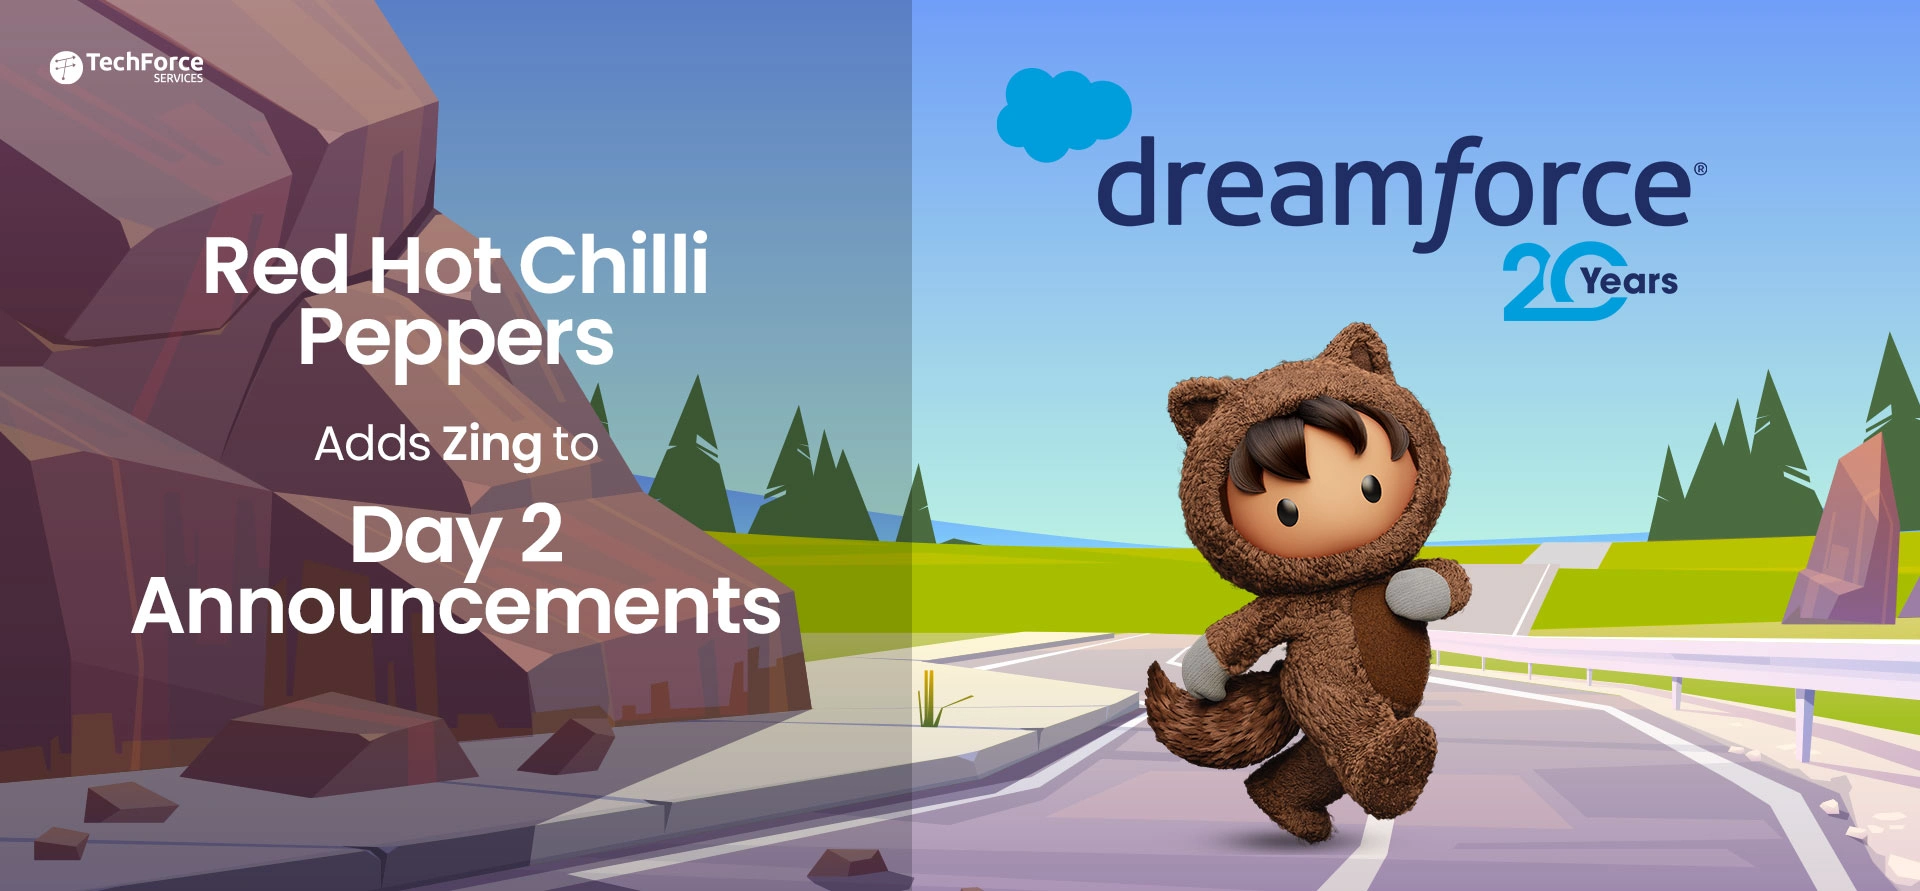 dreamforce-2022-red-hot-chilli-peppers-adds-zing-to-day-2-announcements